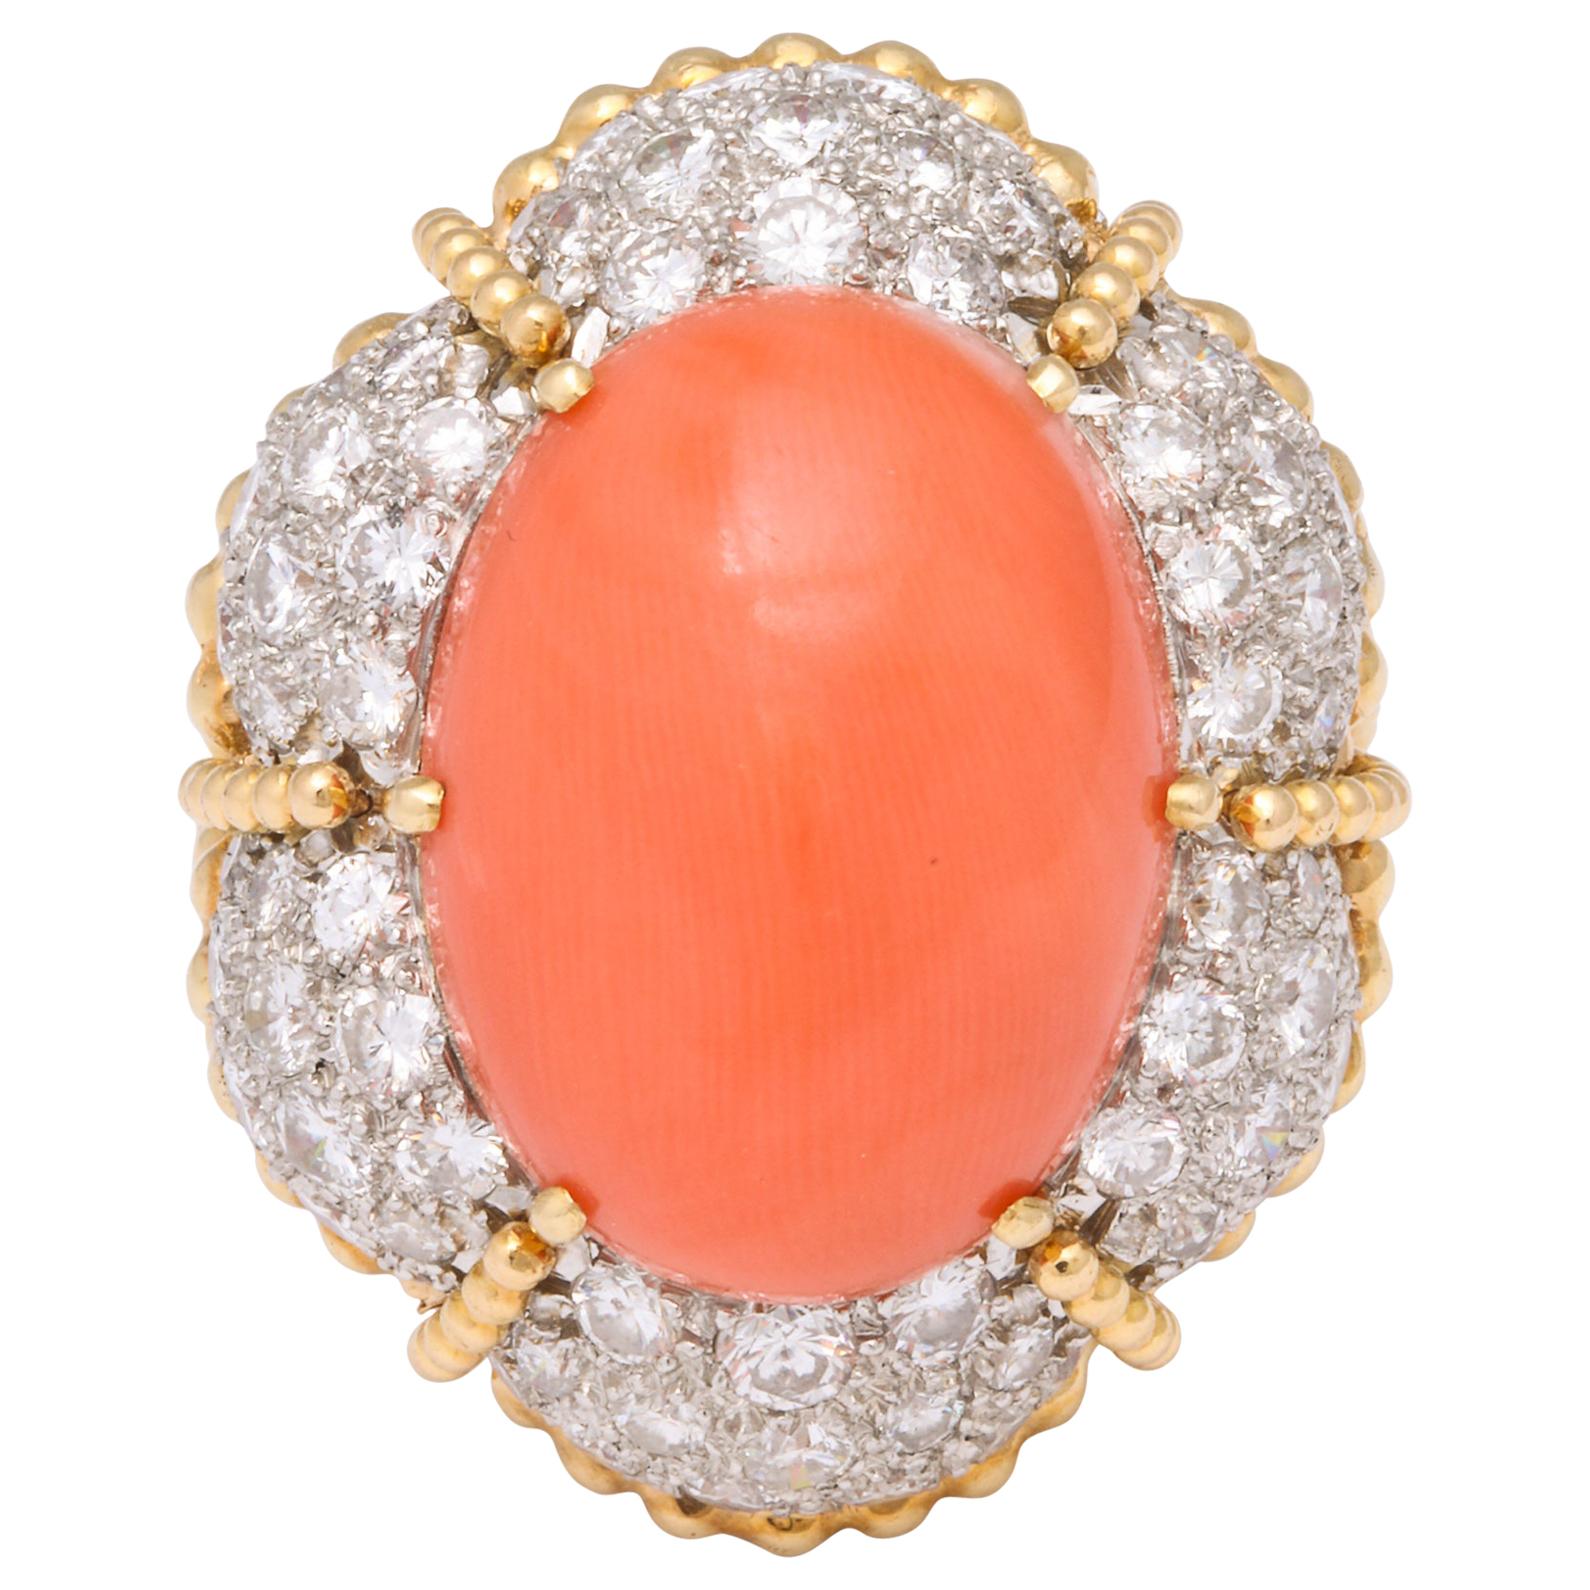 Oversize Orange Coral and Pave Diamond Ring